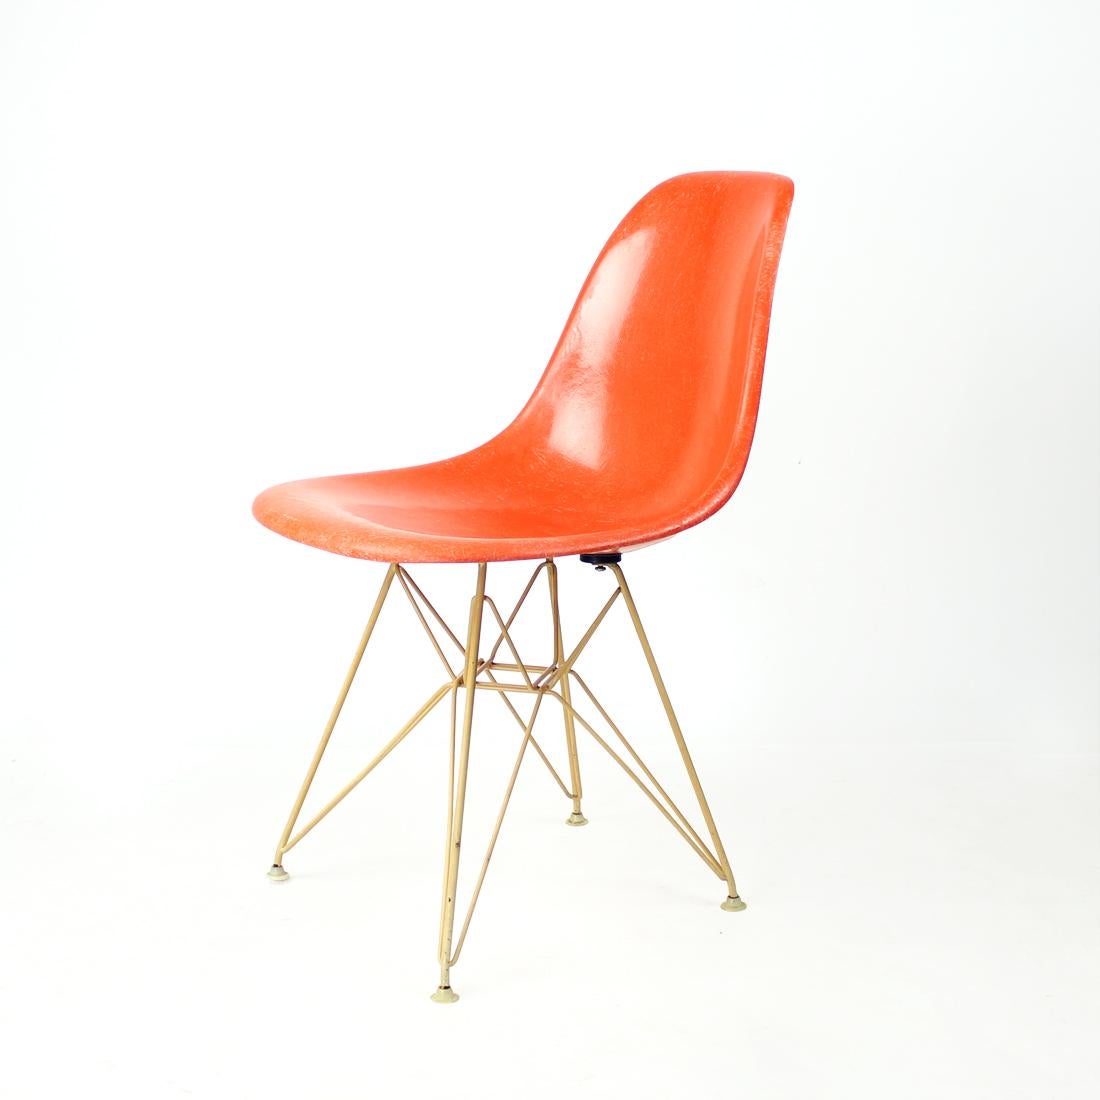 British Orange Eiffel Shell Chair By Charles And Ray Eames For Herman Miller, 1960s For Sale